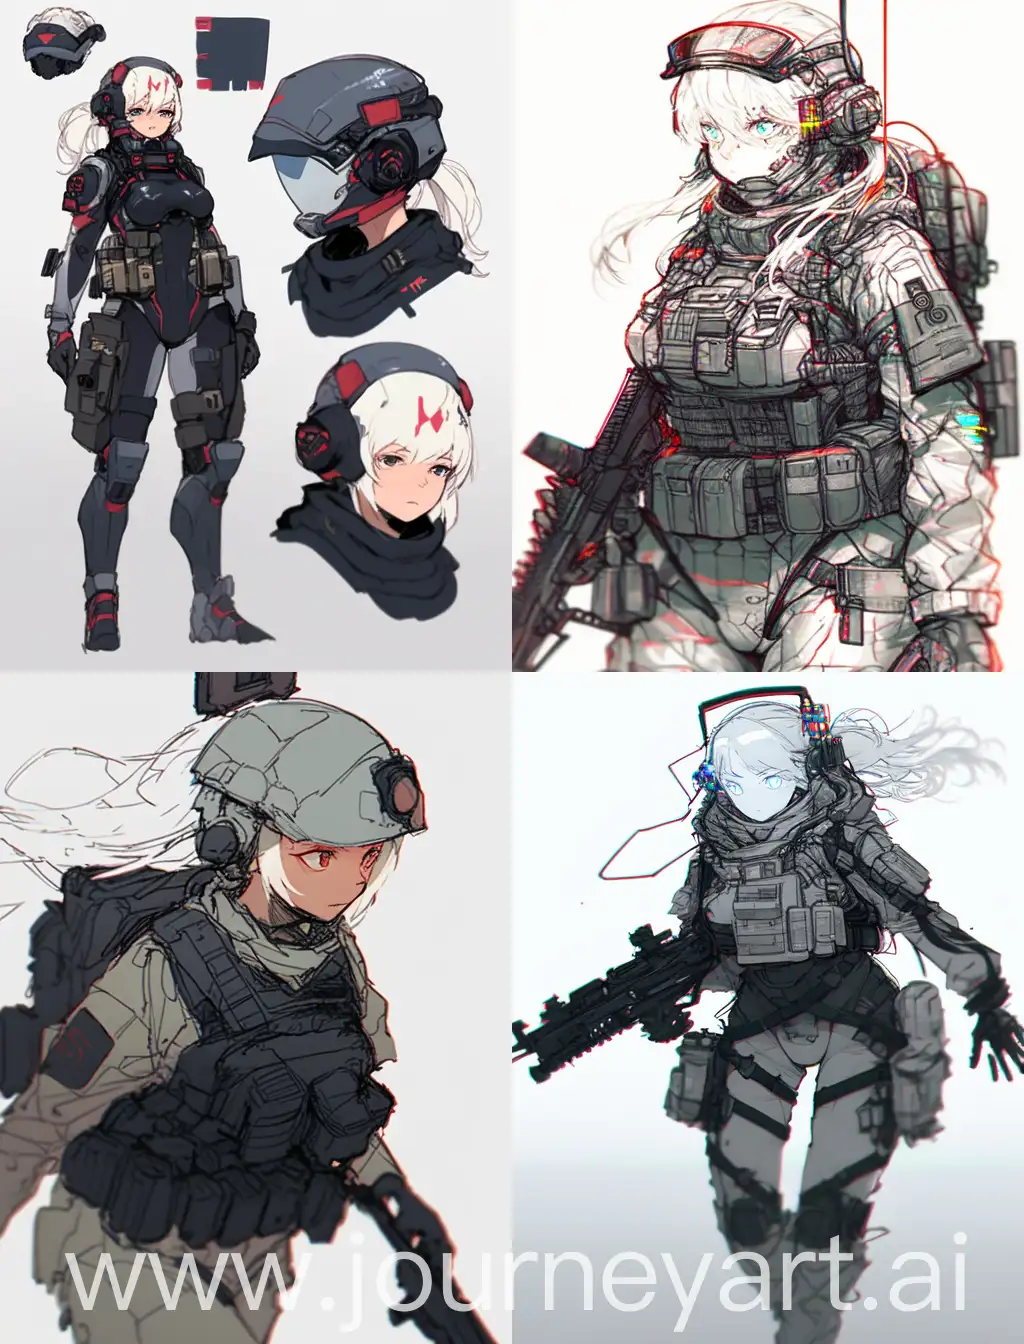 HighTech-Military-Girl-with-Triangle-Helmet-and-White-Hair-Sketch